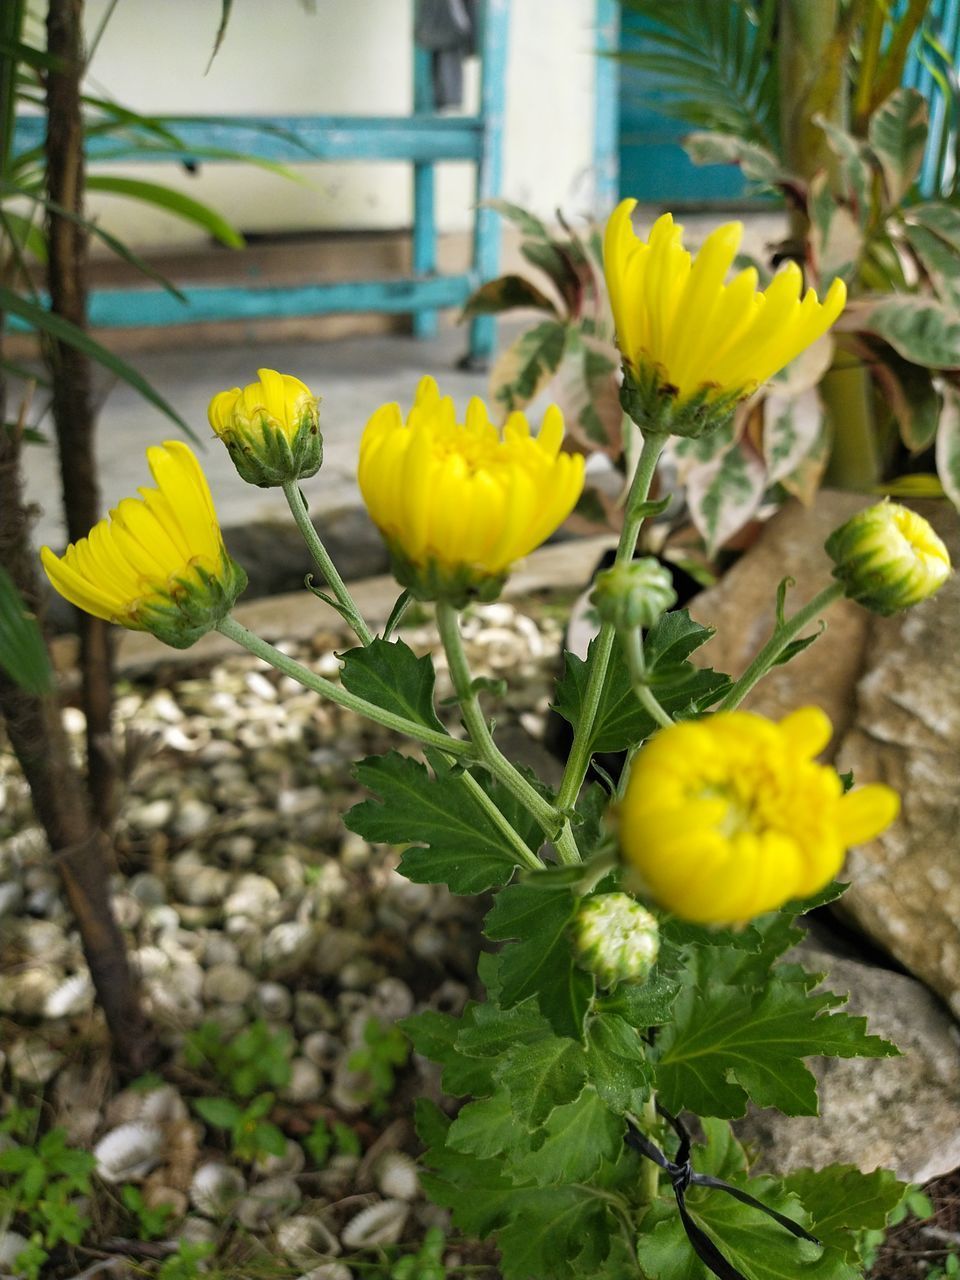 CLOSE-UP OF YELLOW FLOWER